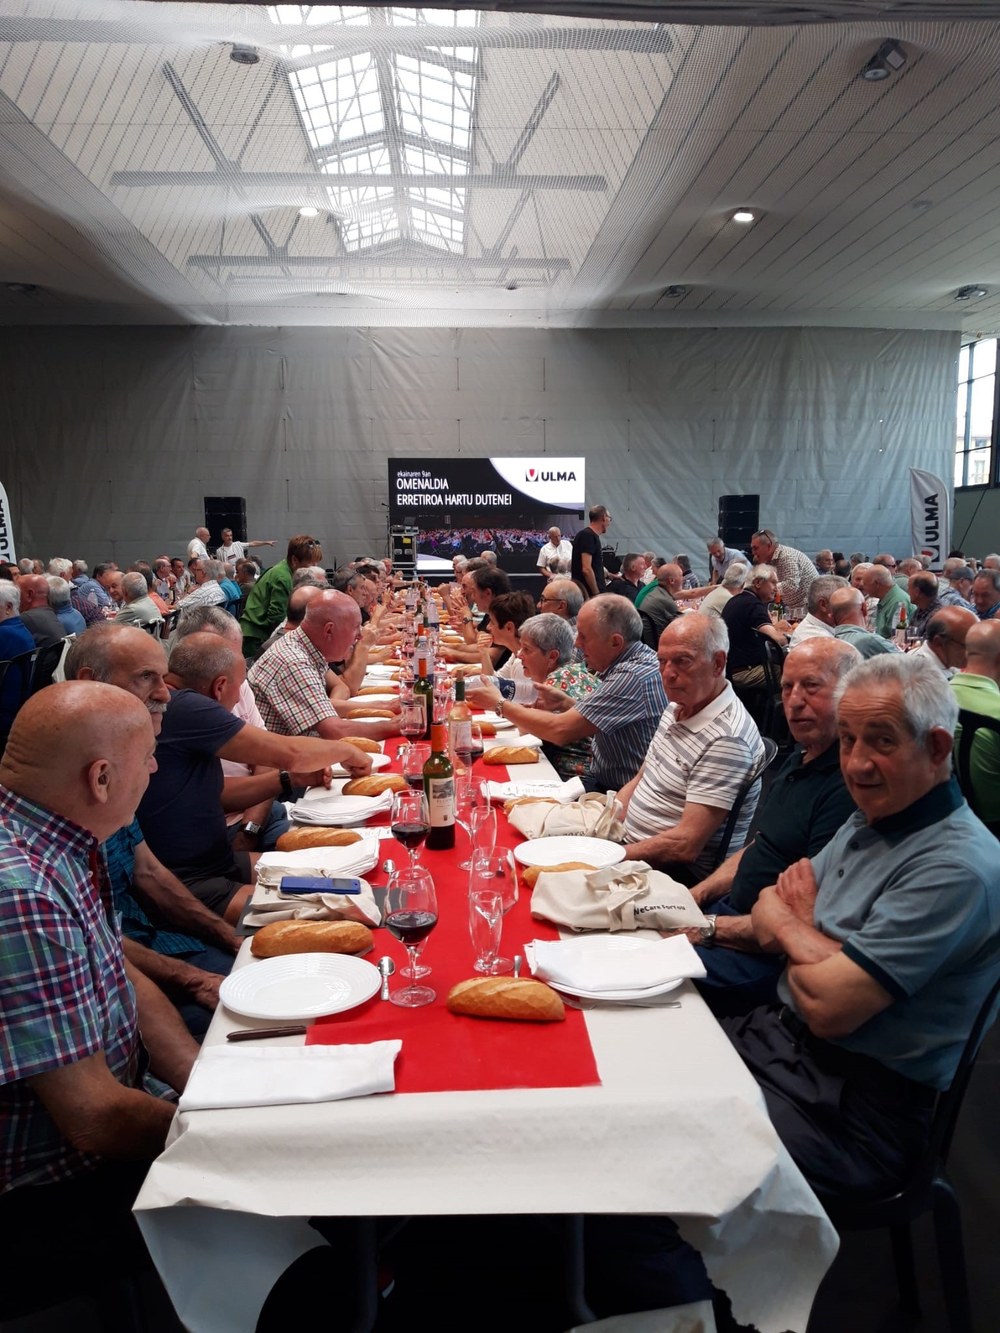 The lunch organized by ULMA took place in the Zubikoa Sportscentre.